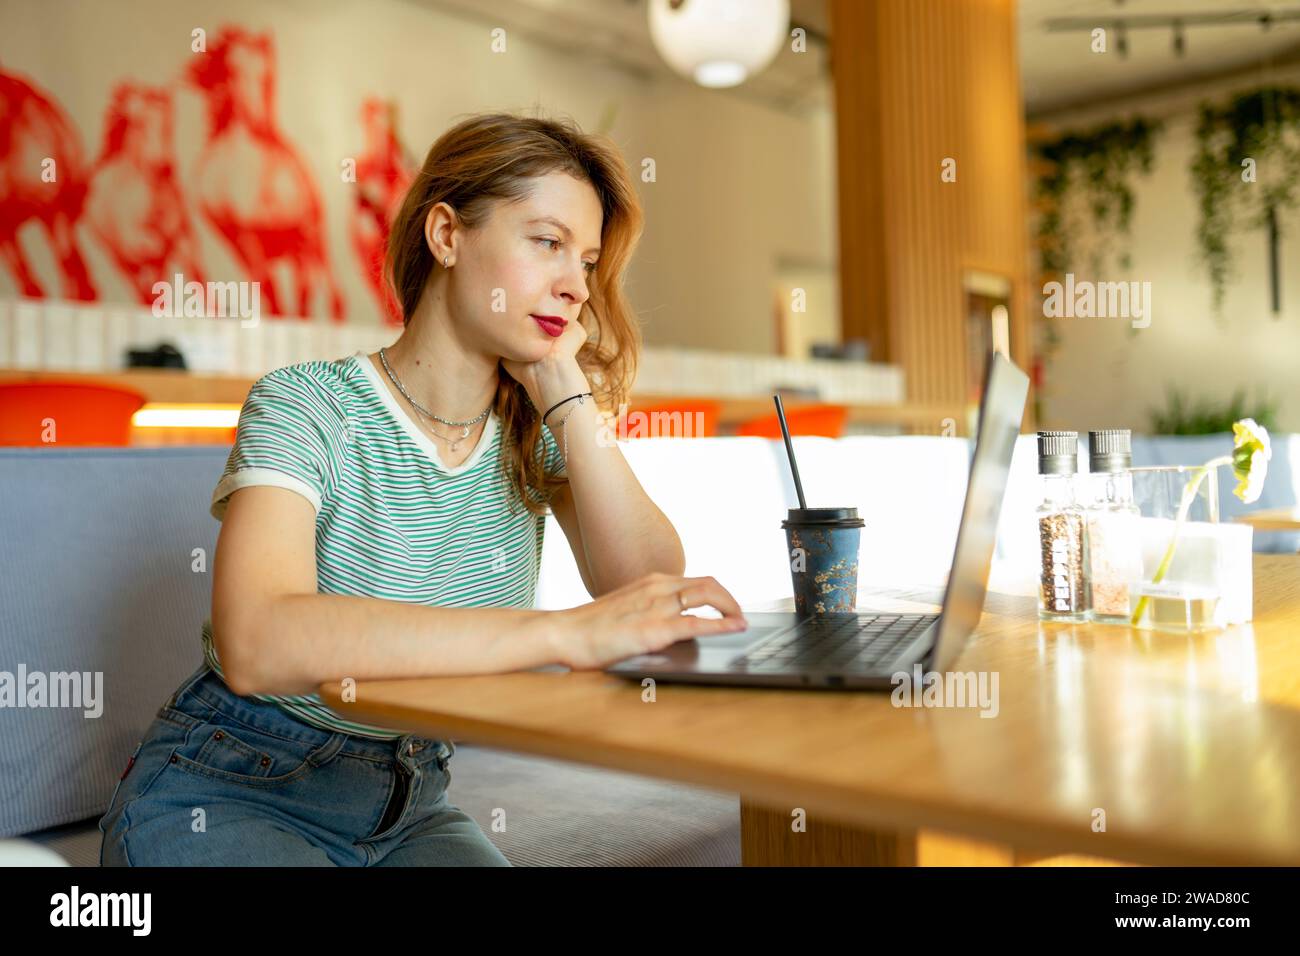 Serious woman working on laptop in cafe Stock Photo